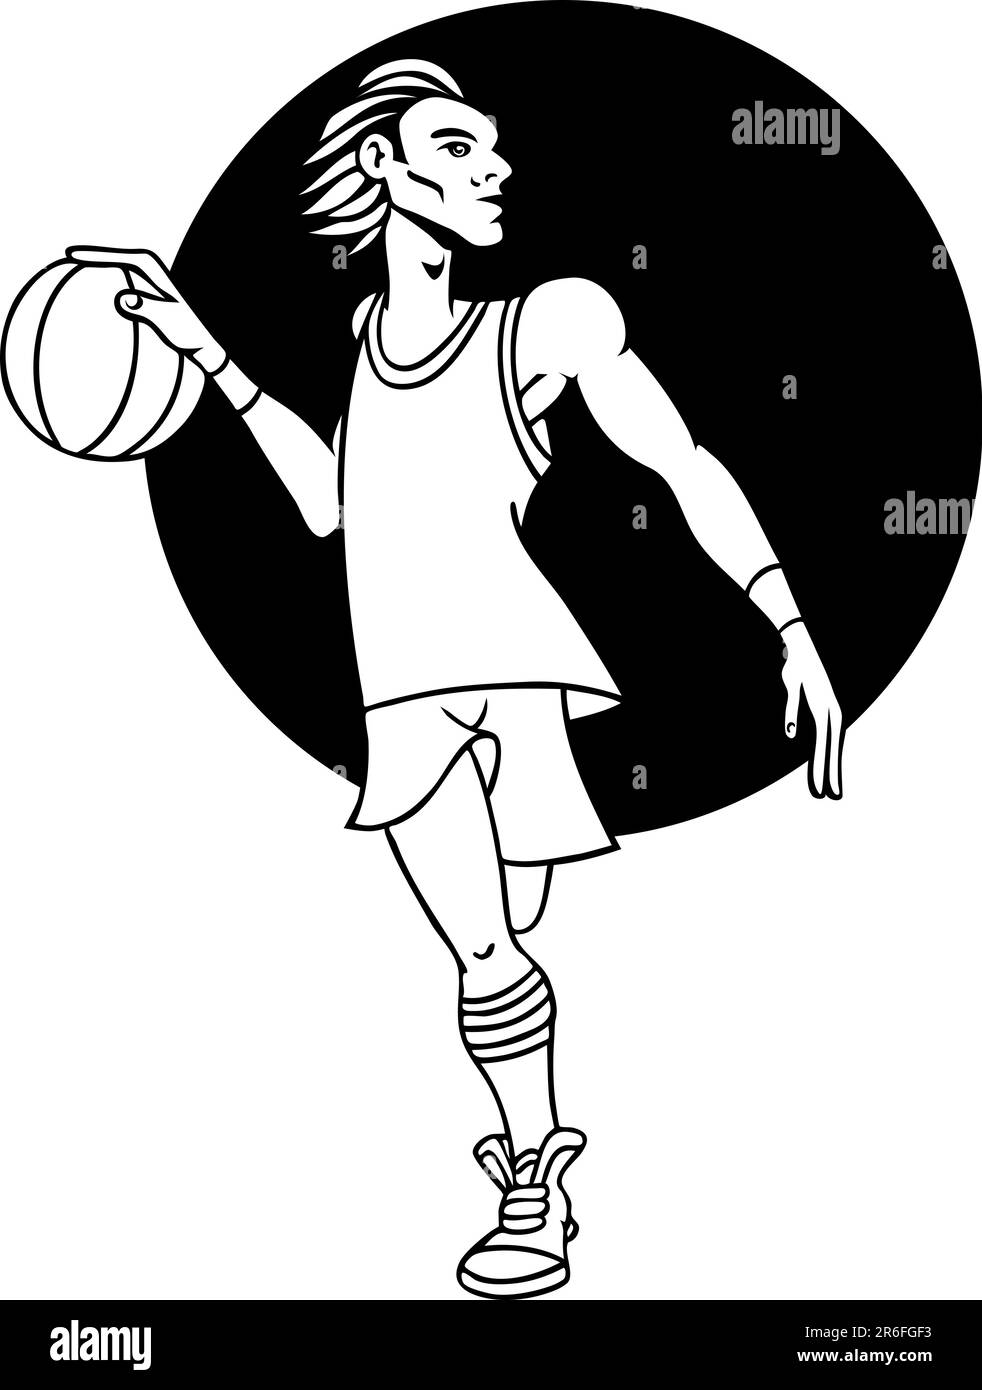 Cartoon basketball player isolated on a white background. Stock Vector